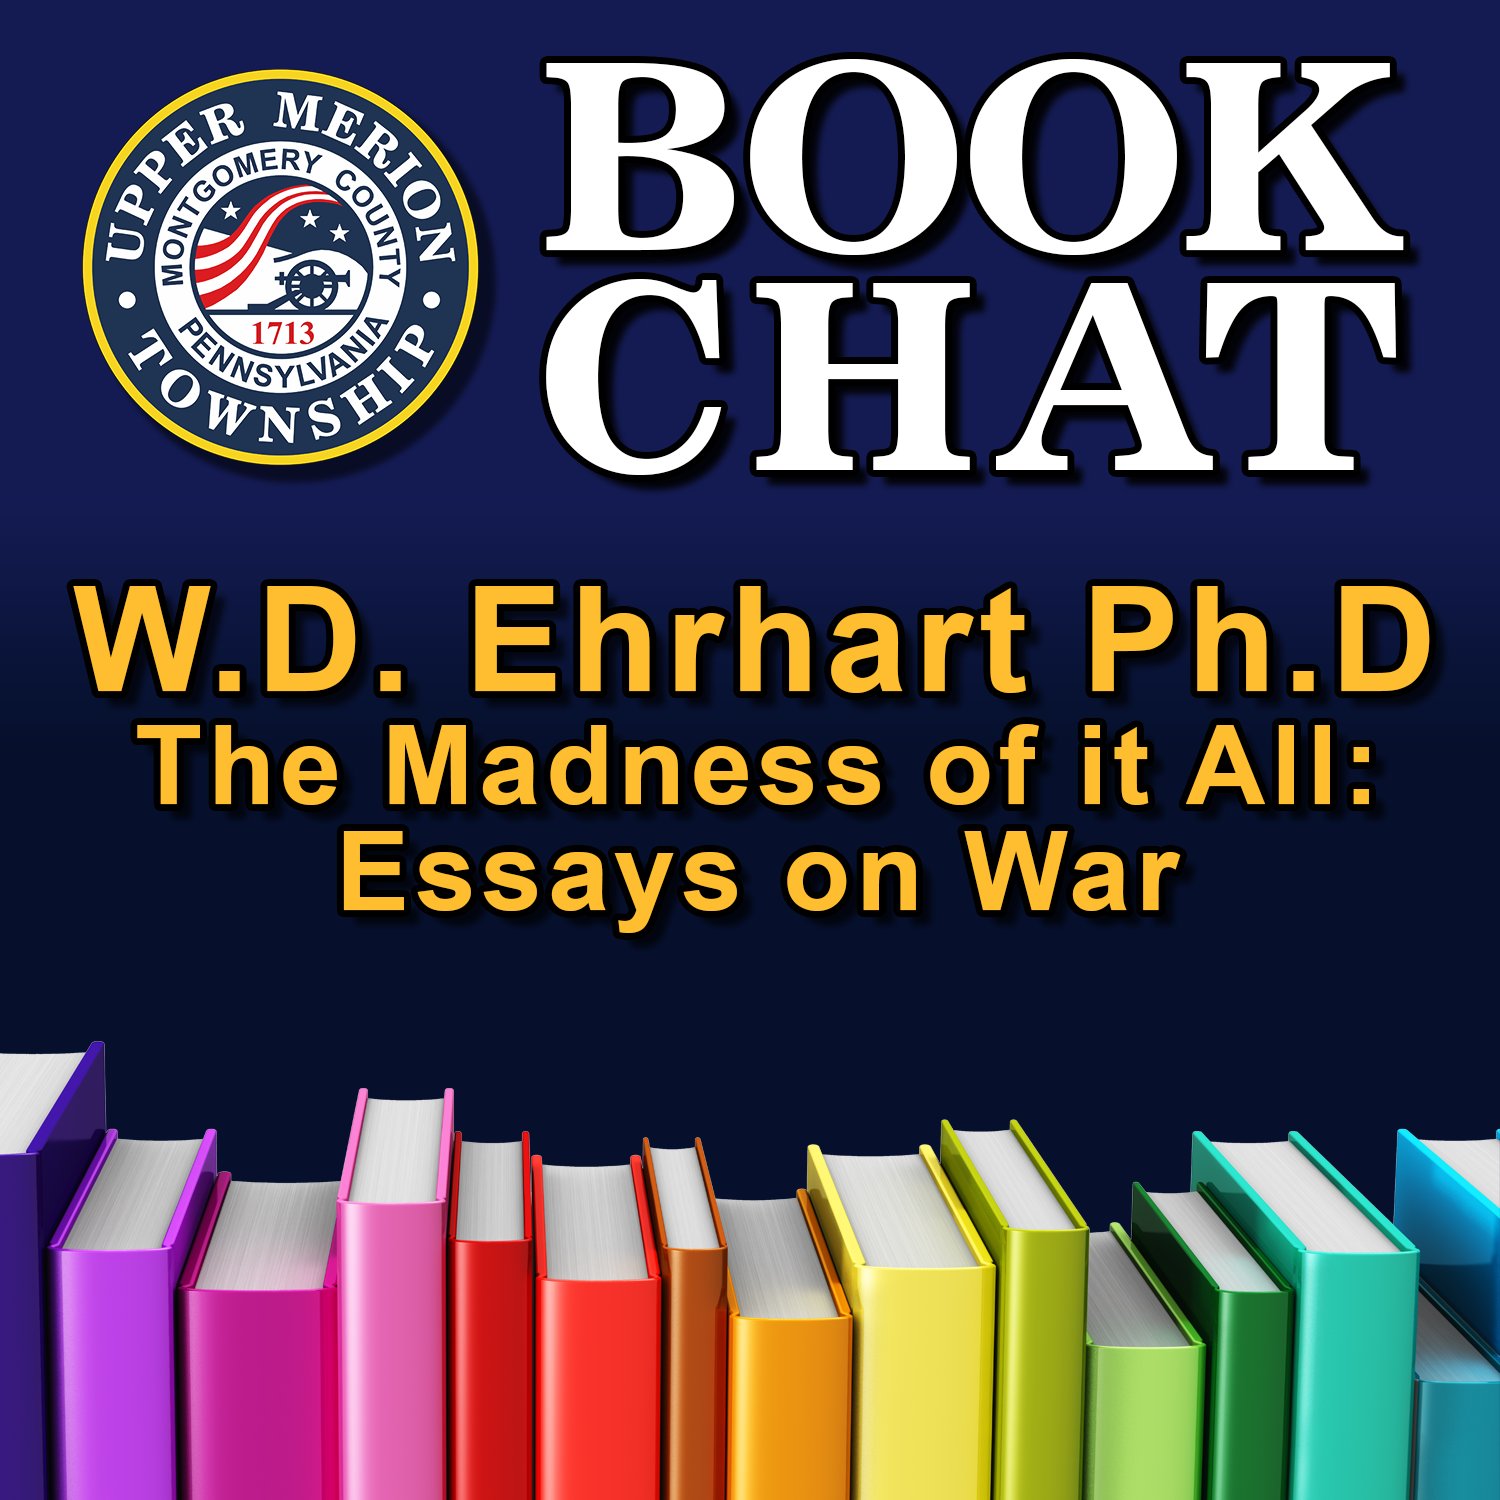 W.D. Ehrhart Ph.D. -"The Madness of it All: Essays on war, Literature and American Life"